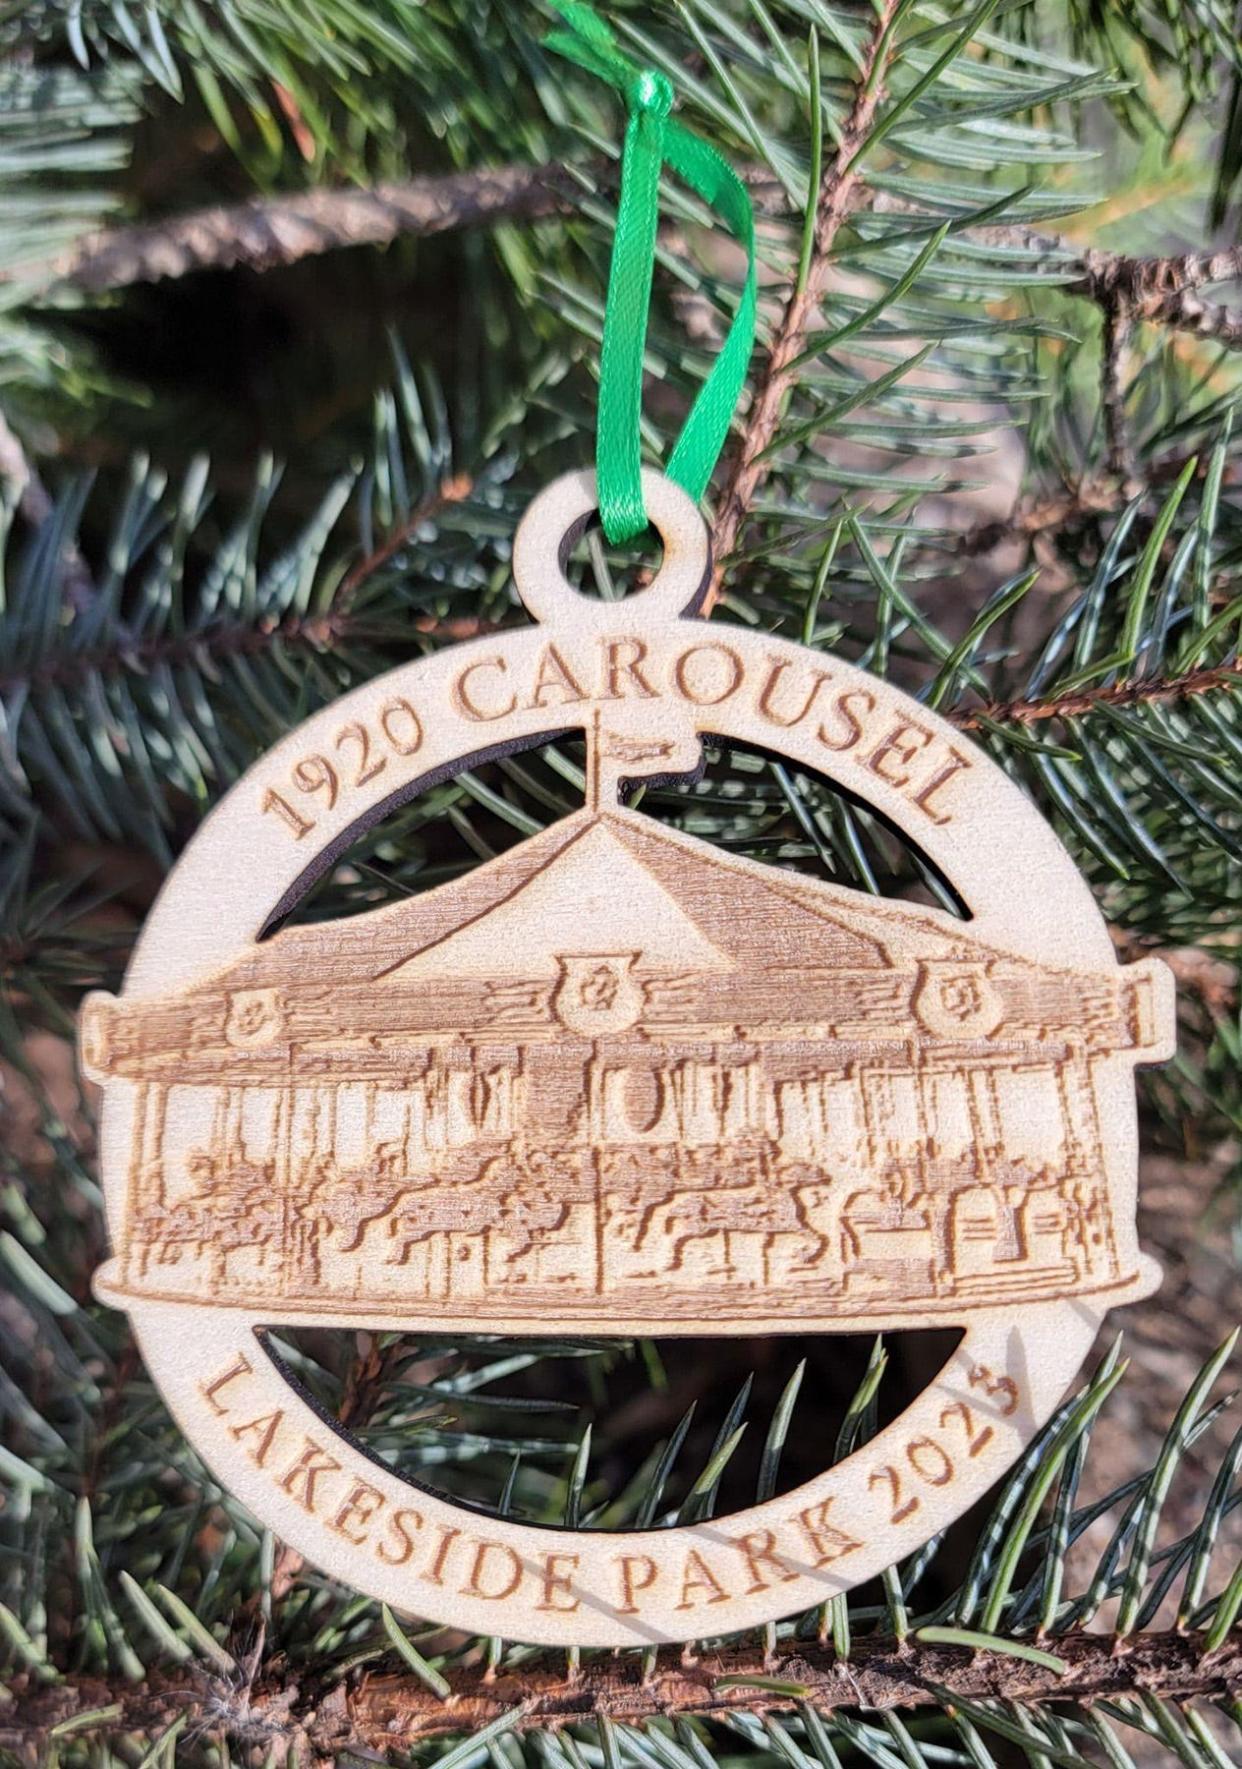 The Friends of Lakeside Park's 2023 collector's ornament features a carousel. It will be available to purchase during the group's open house on Dec. 7 or online at lakesidepark.org.